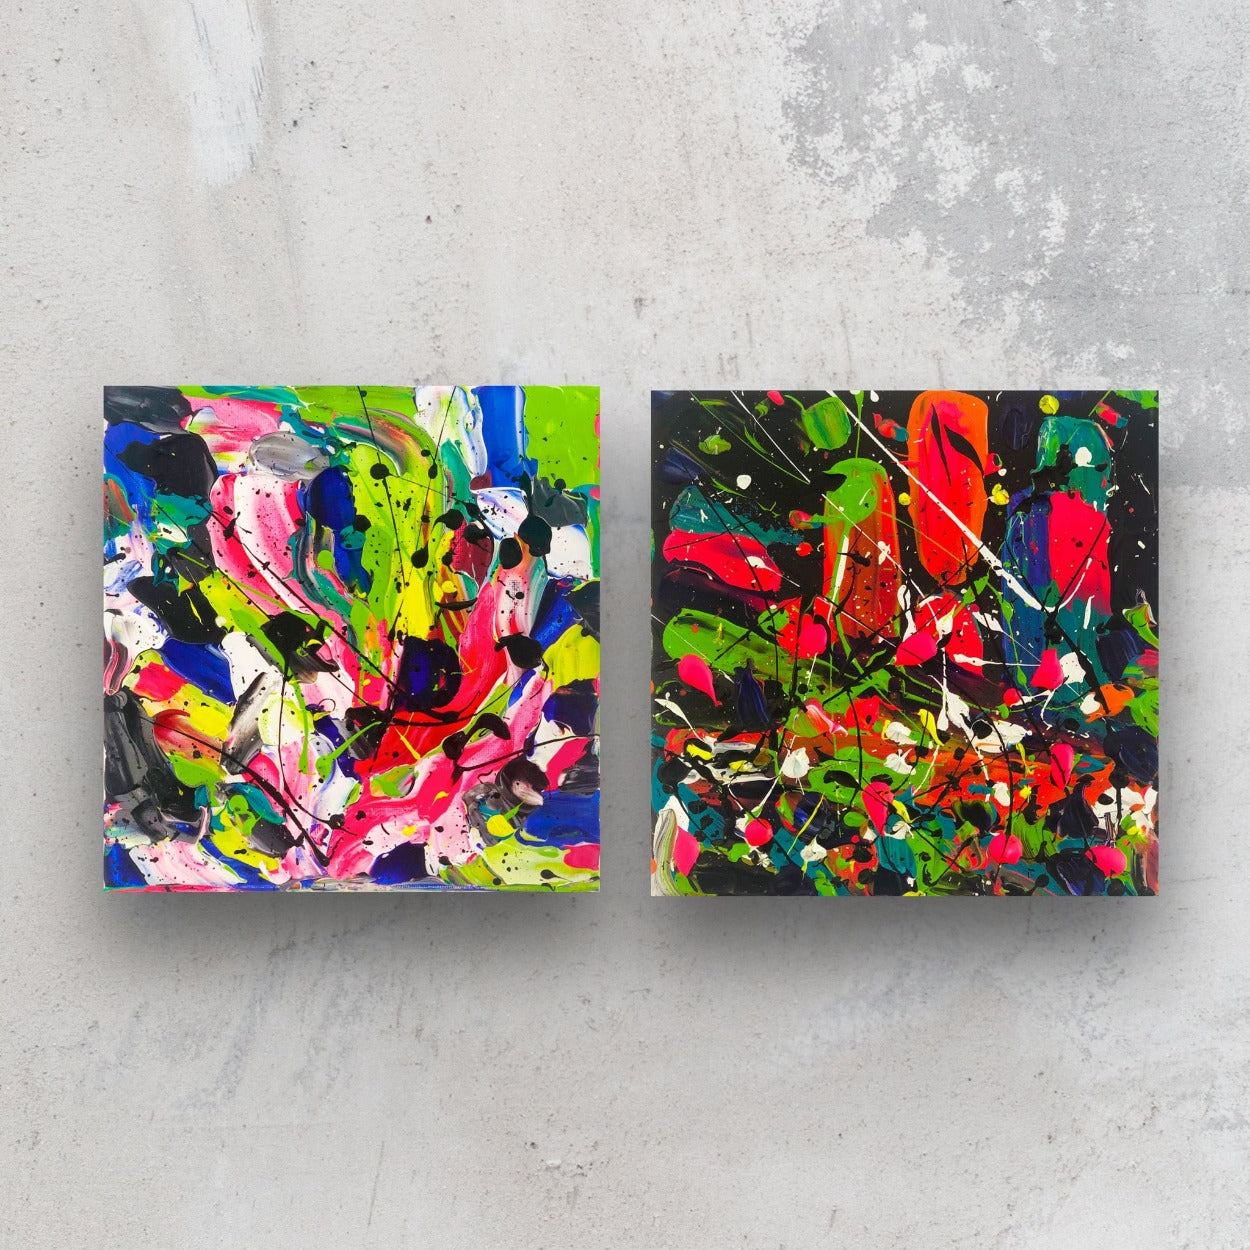 From left, City Days and City Nights Diptych, original abstract paintings by Bridget Bradley. Brightly coloured abstracts with texture on stretched canvas, 20cm x 20cmx x 2dcm. 